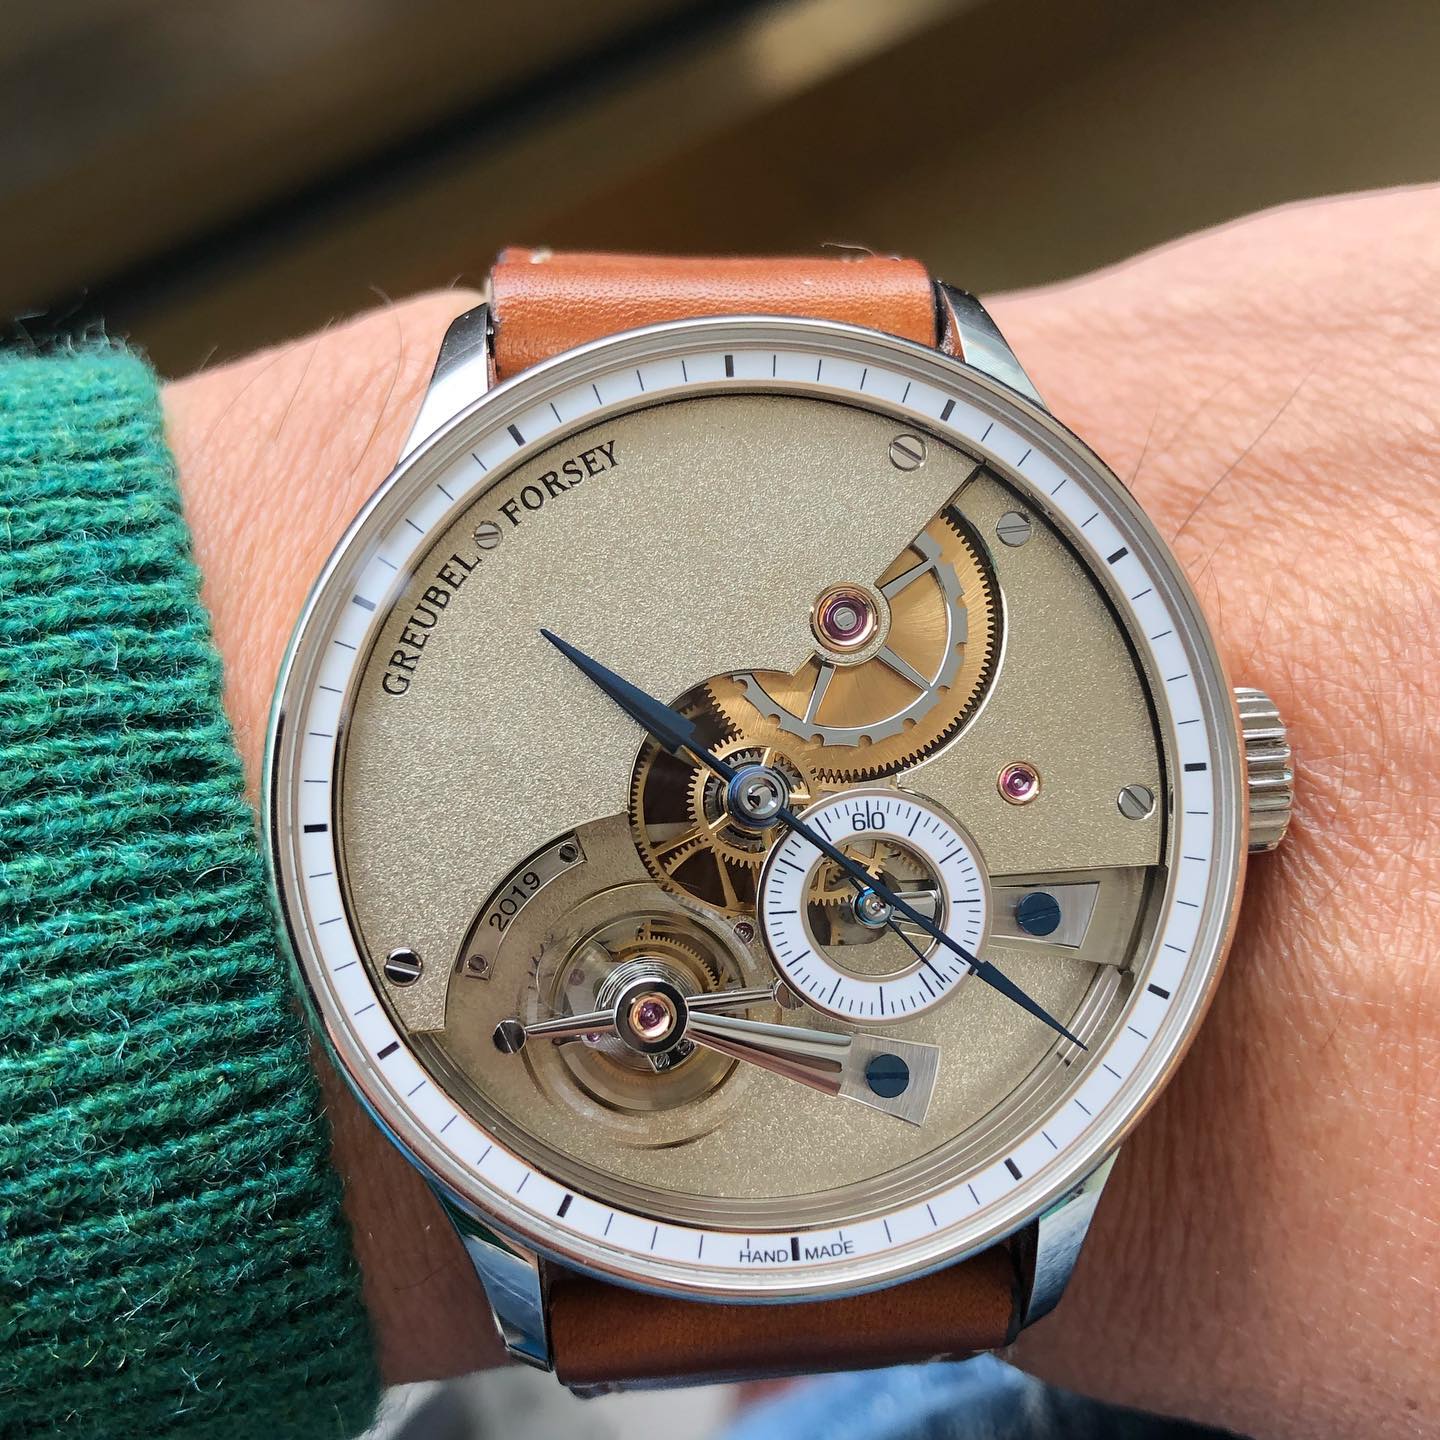 Greubel Forsey Hand Made 1 (2019)